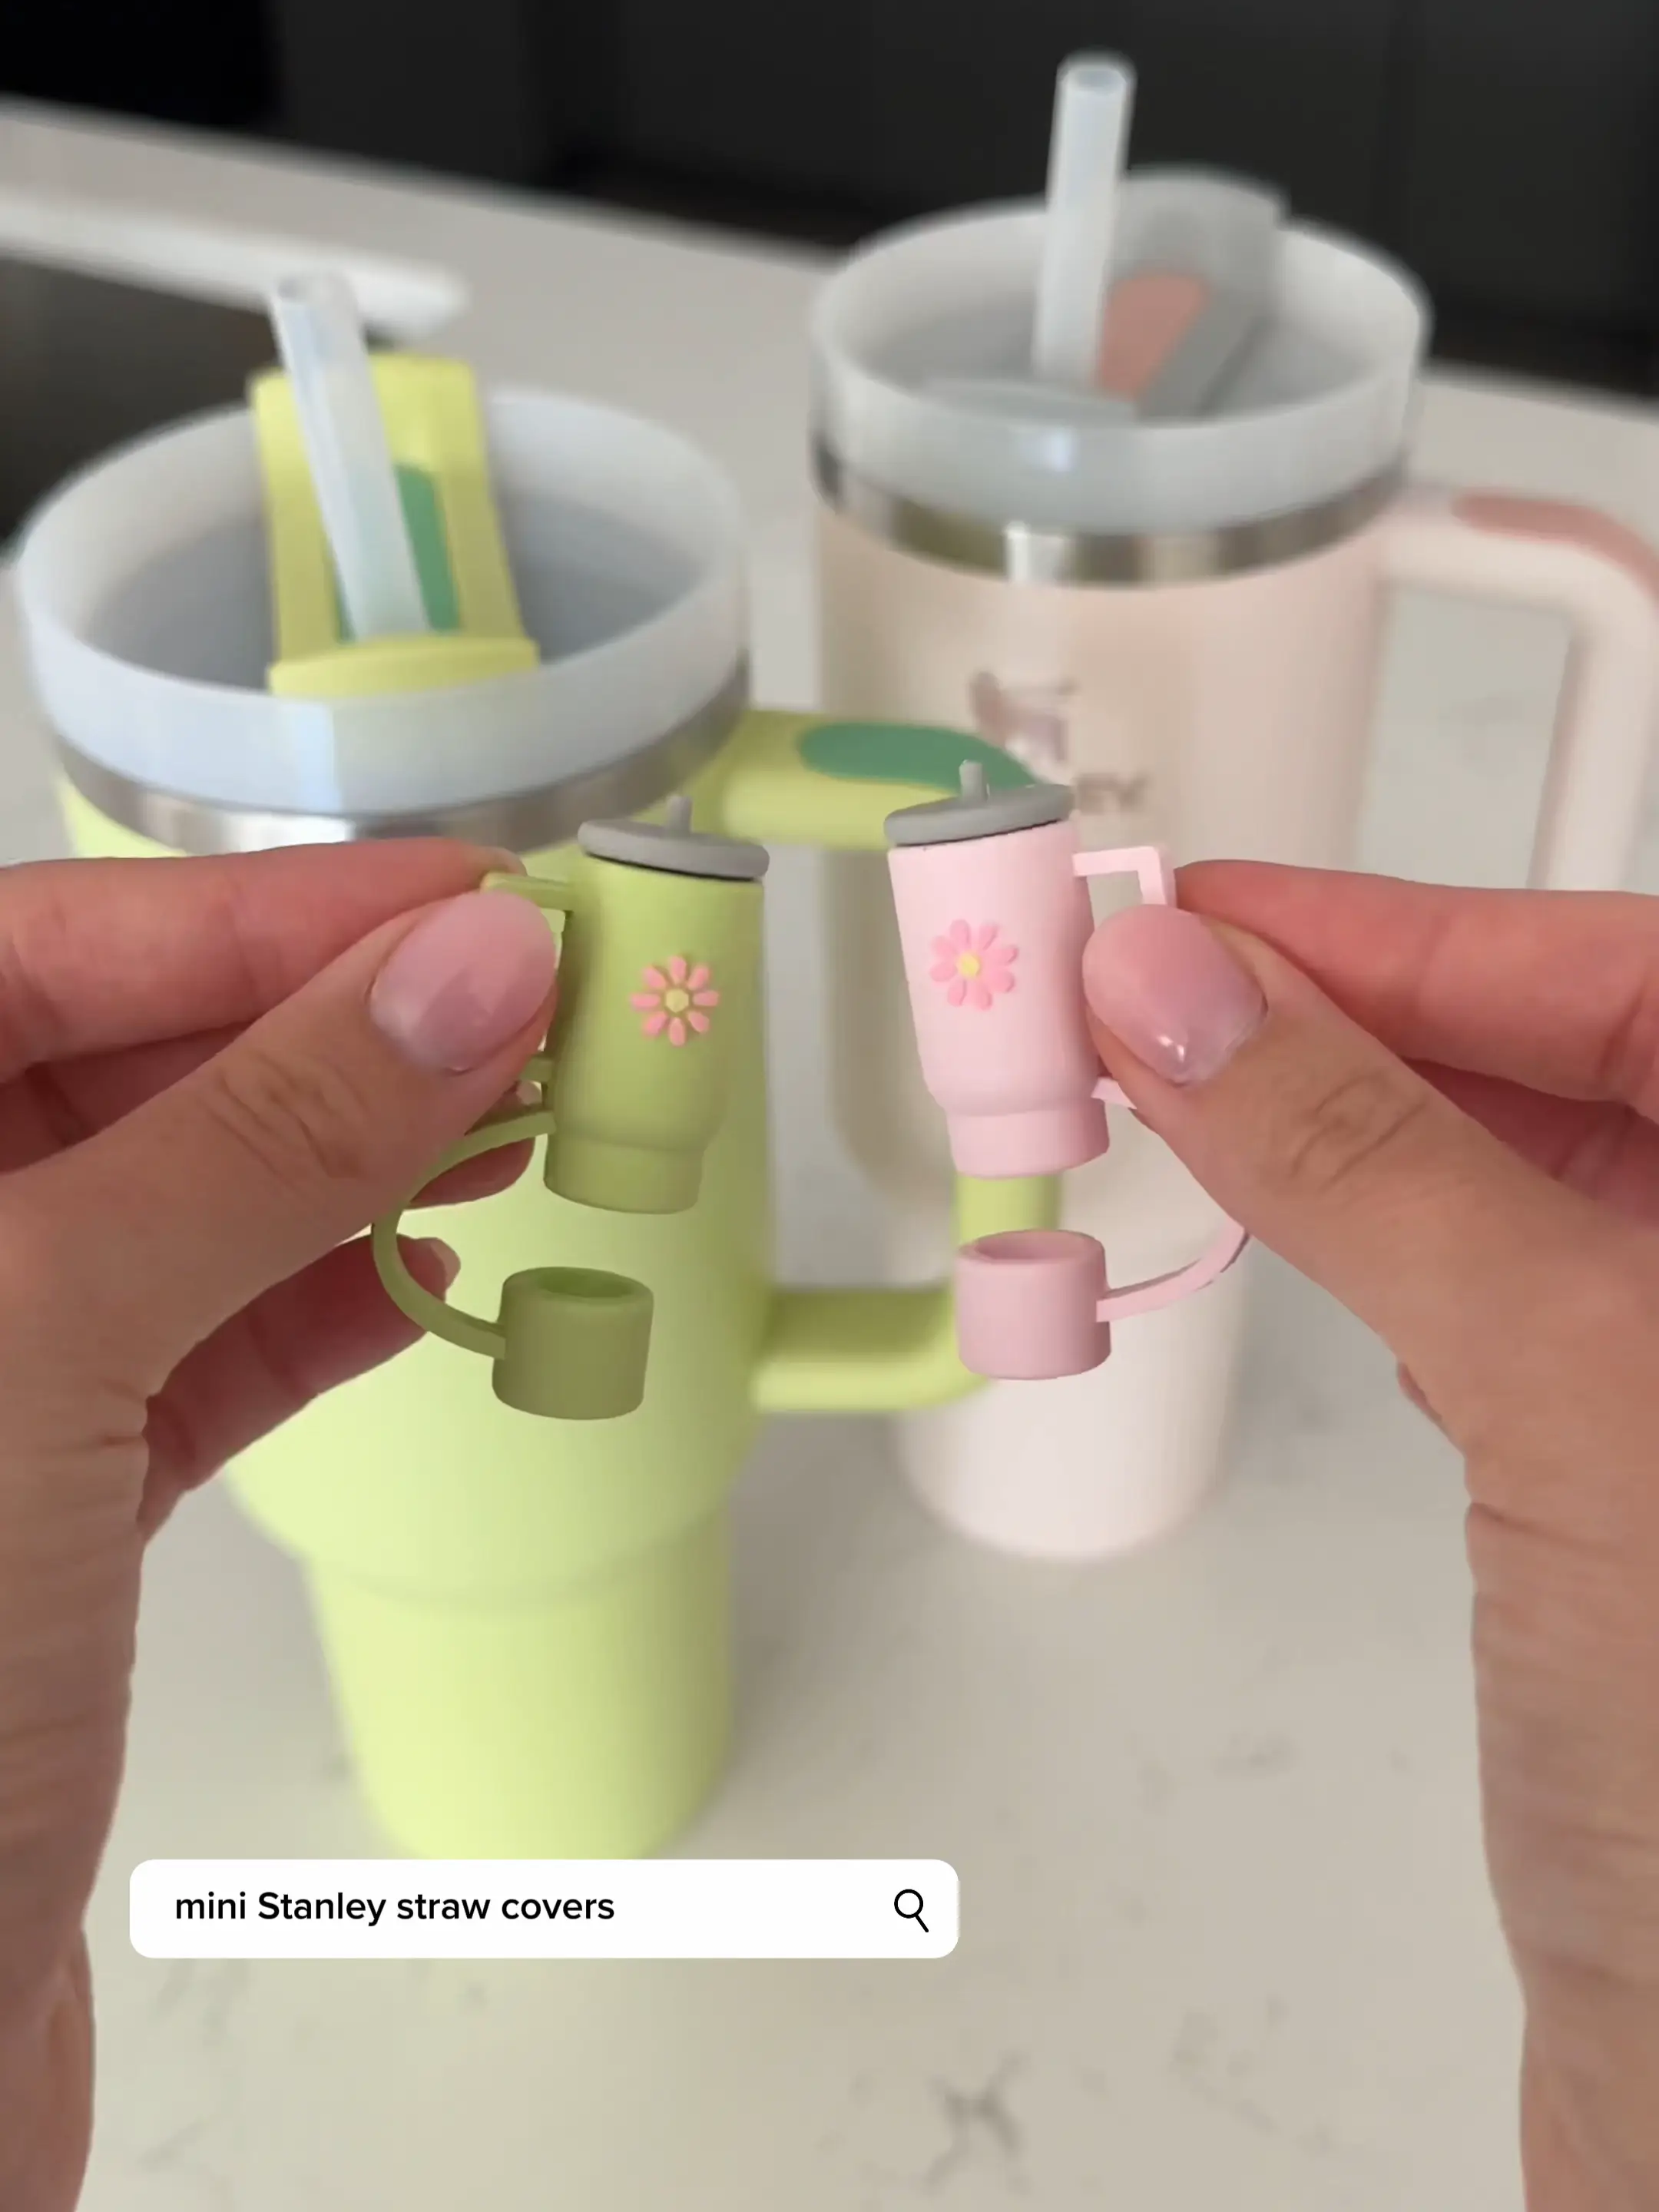 mini Stanley tumbler straw covers, Video published by sweetandtidy